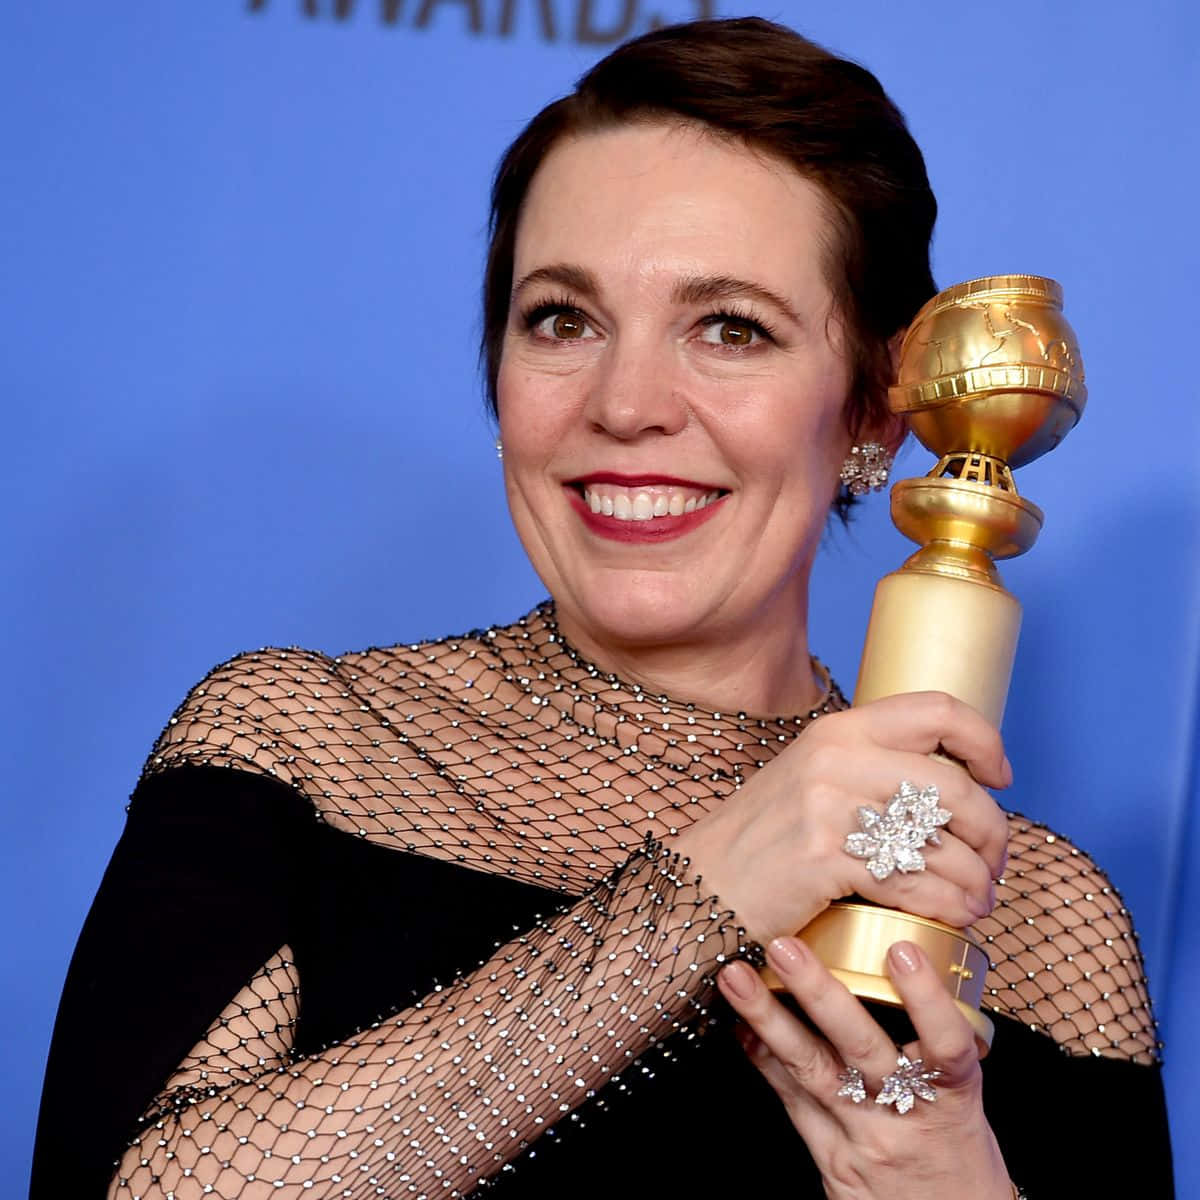 Olivia Colman Glowing Radiantly At A Red Carpet Event Wallpaper